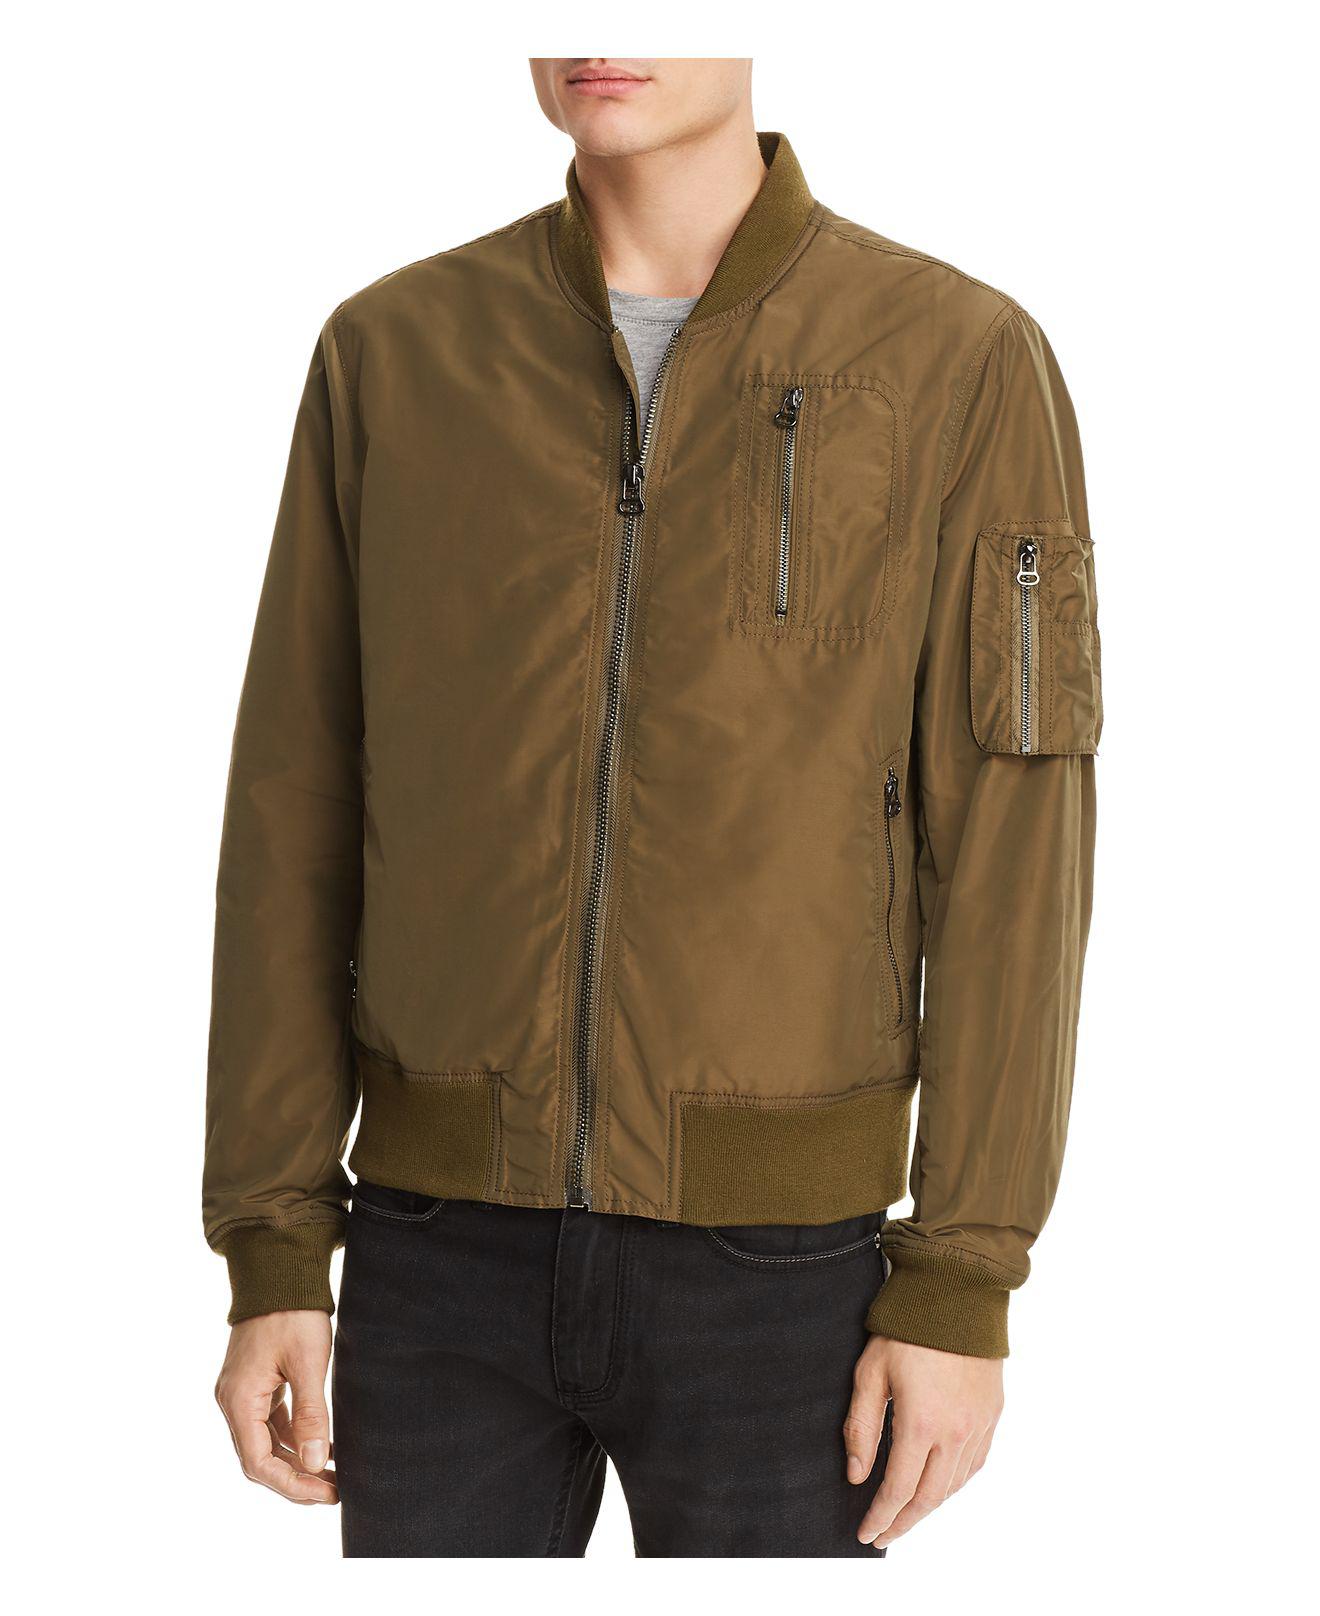 Lyst - Blank Nyc Bomber Jacket for Men